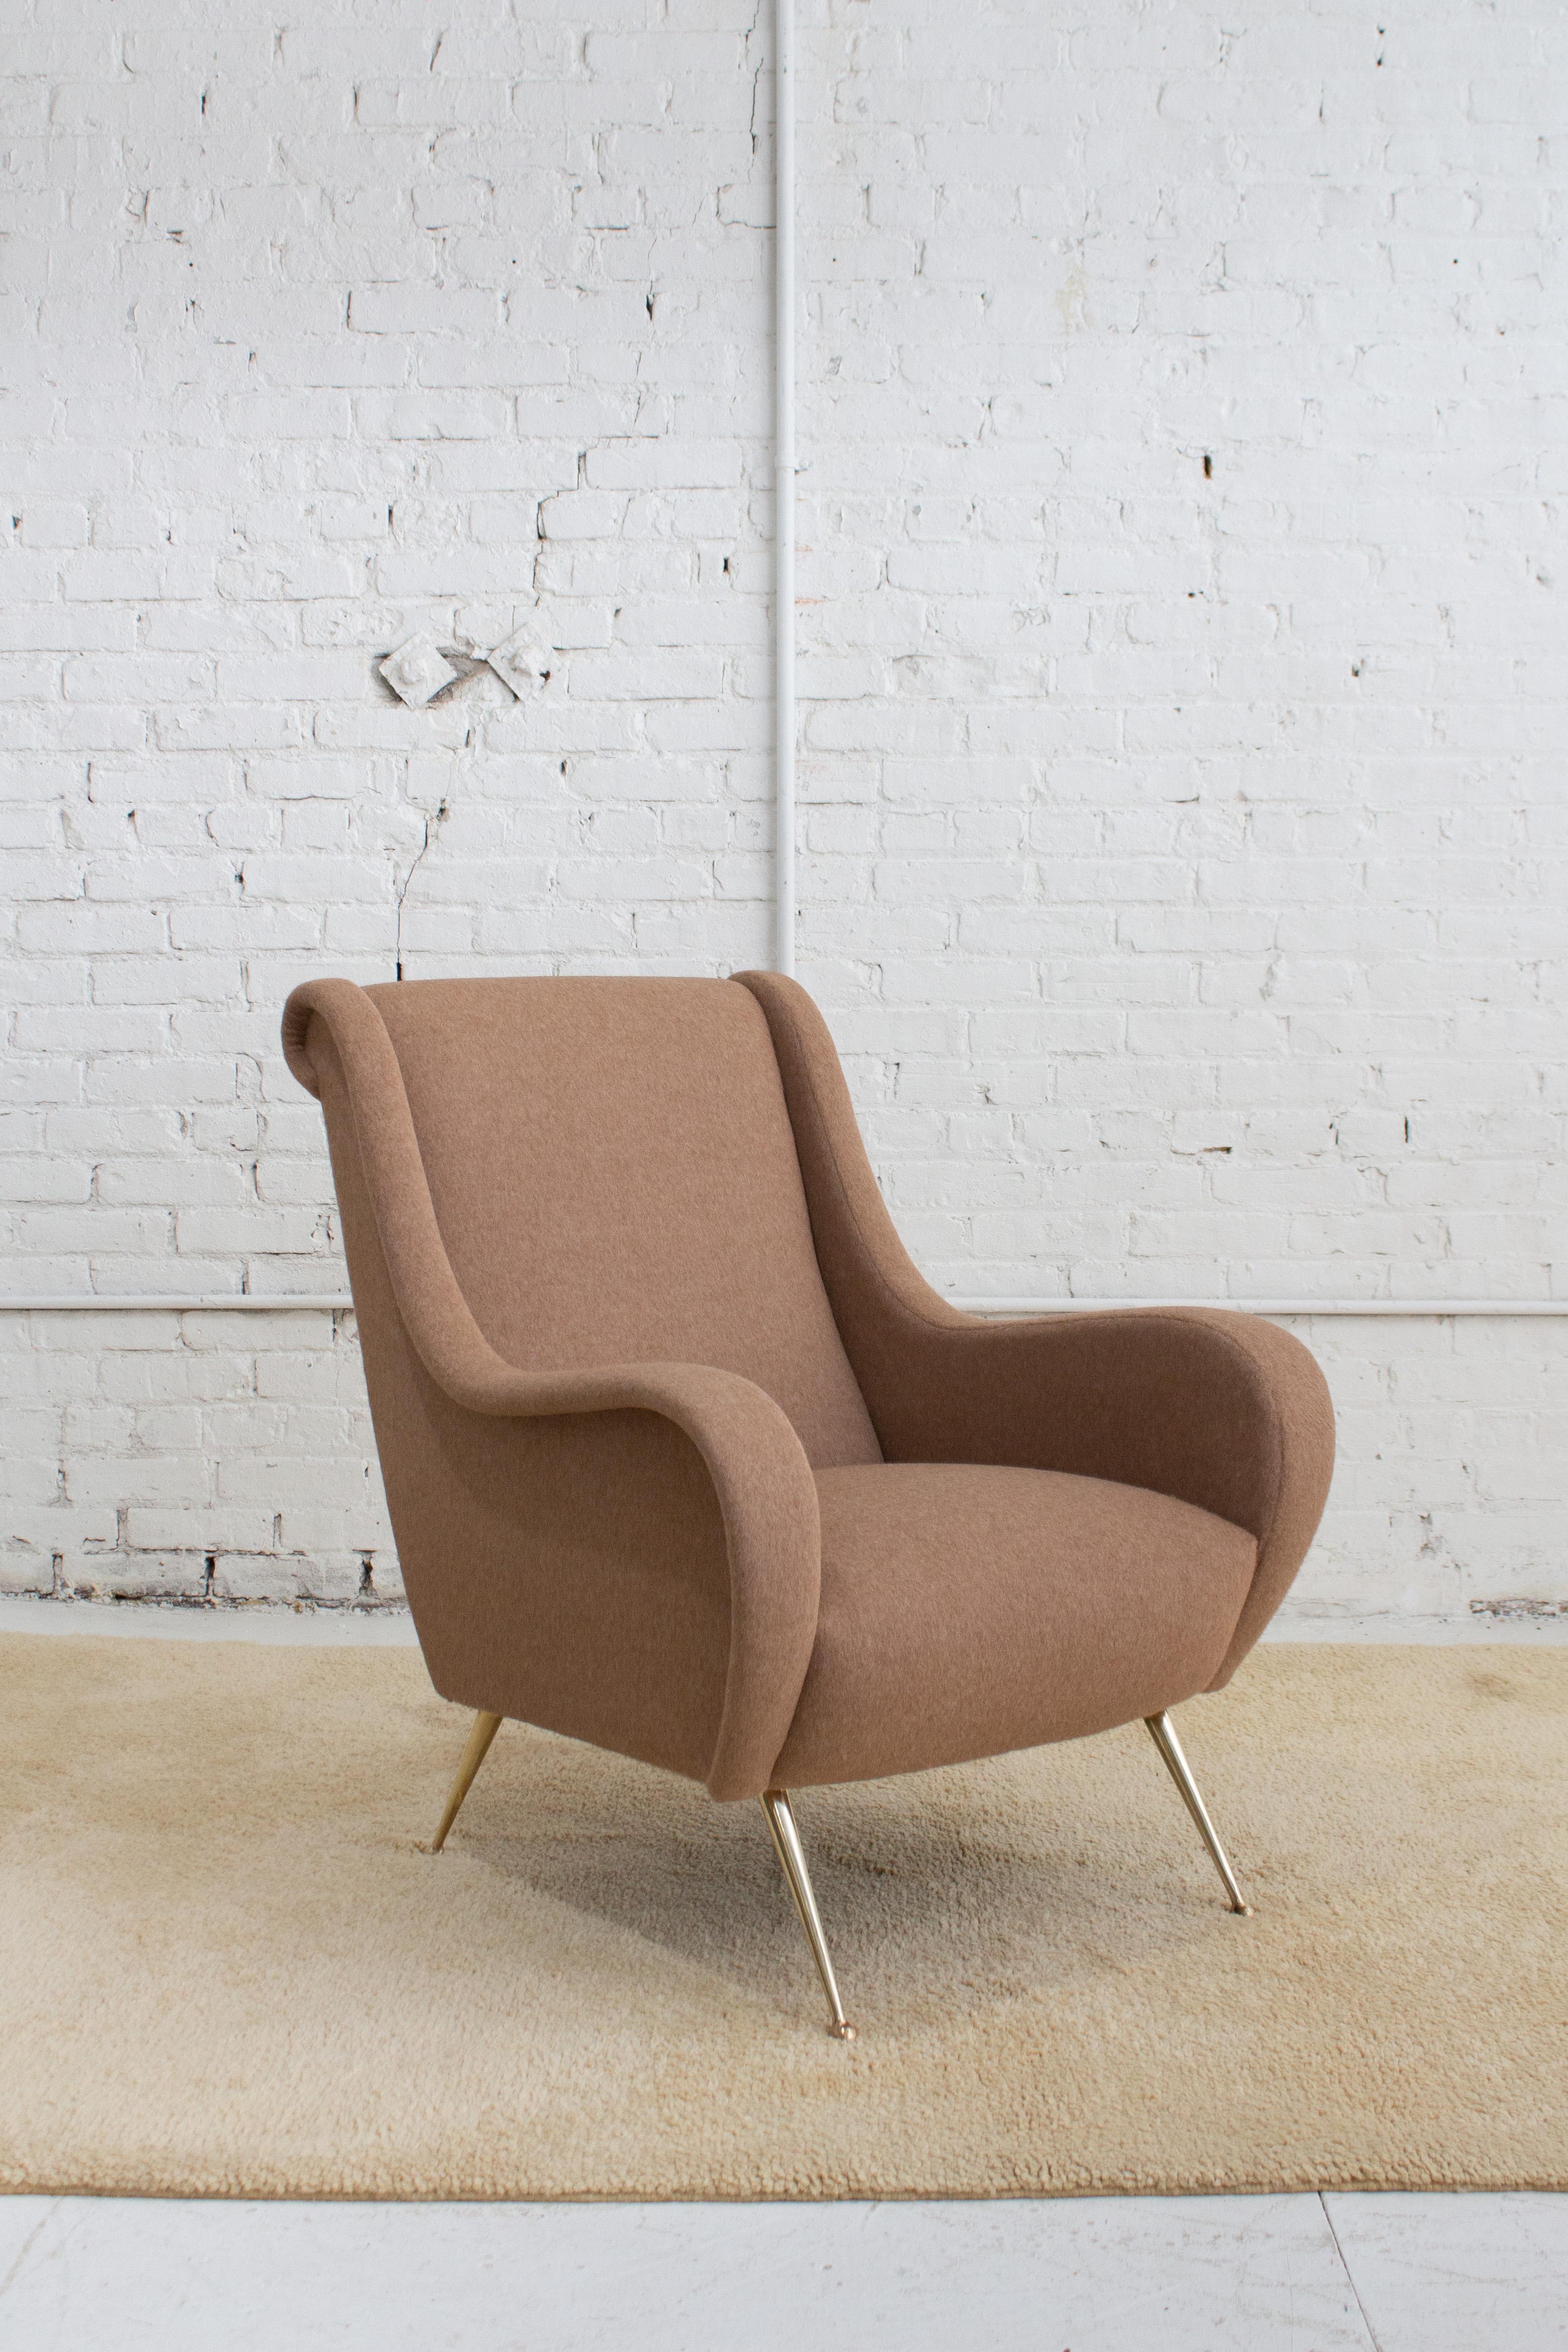 A mid century Italian armchair attributed to Giuseppe Rossi Di Albizzate. A sculptural arm wraps up to the headrest creating a stylized silhouette. Brass feet. Newly reupholstered in a soft textured beige wool. Sourced in Northern Italy. Pair